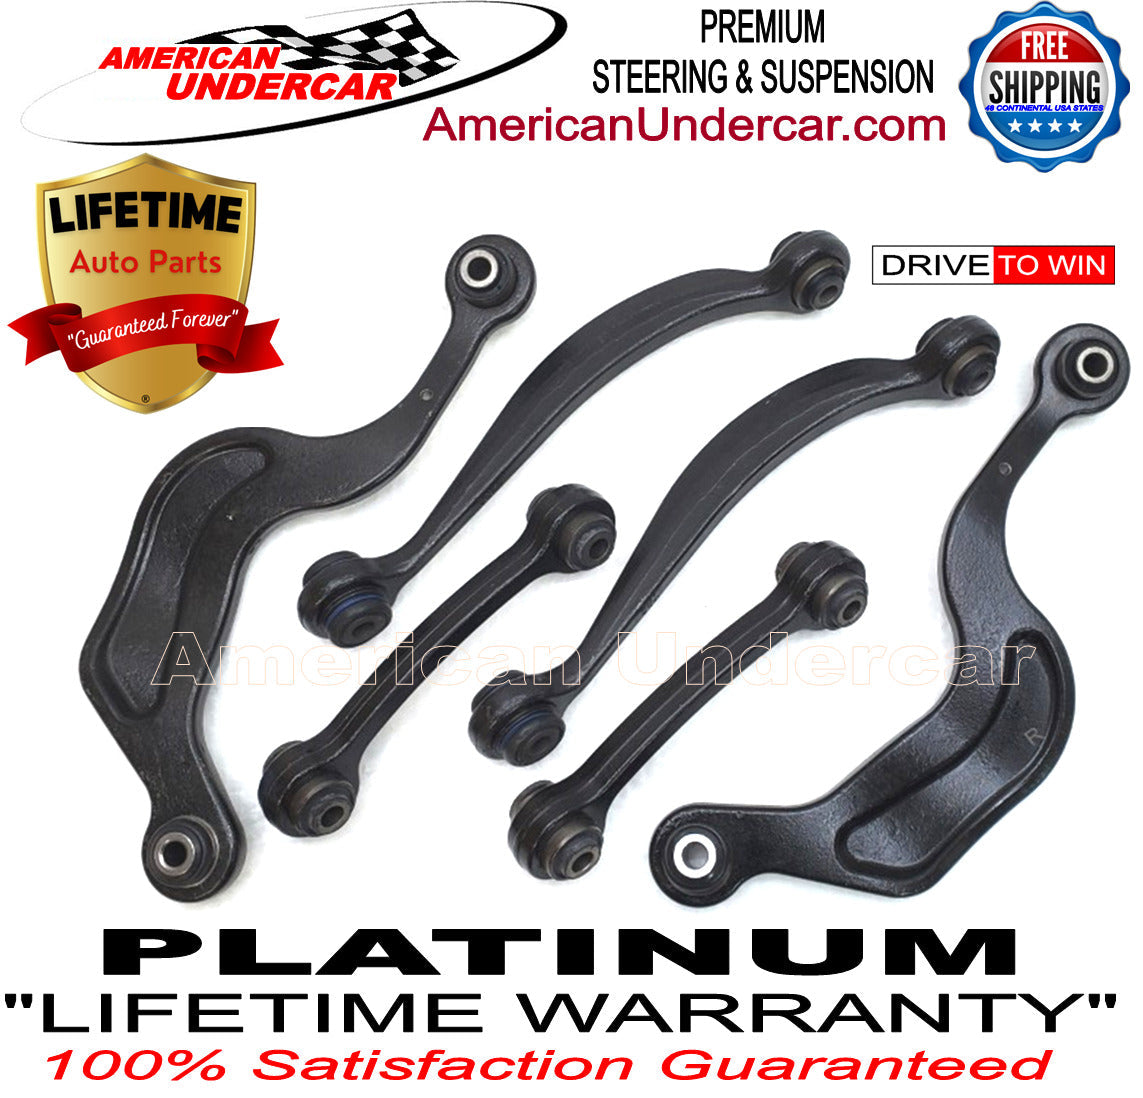 Lifetime Control Arm Link Rear Suspension Kit for 2008-2017 Buick Enclave 2WD, AWD